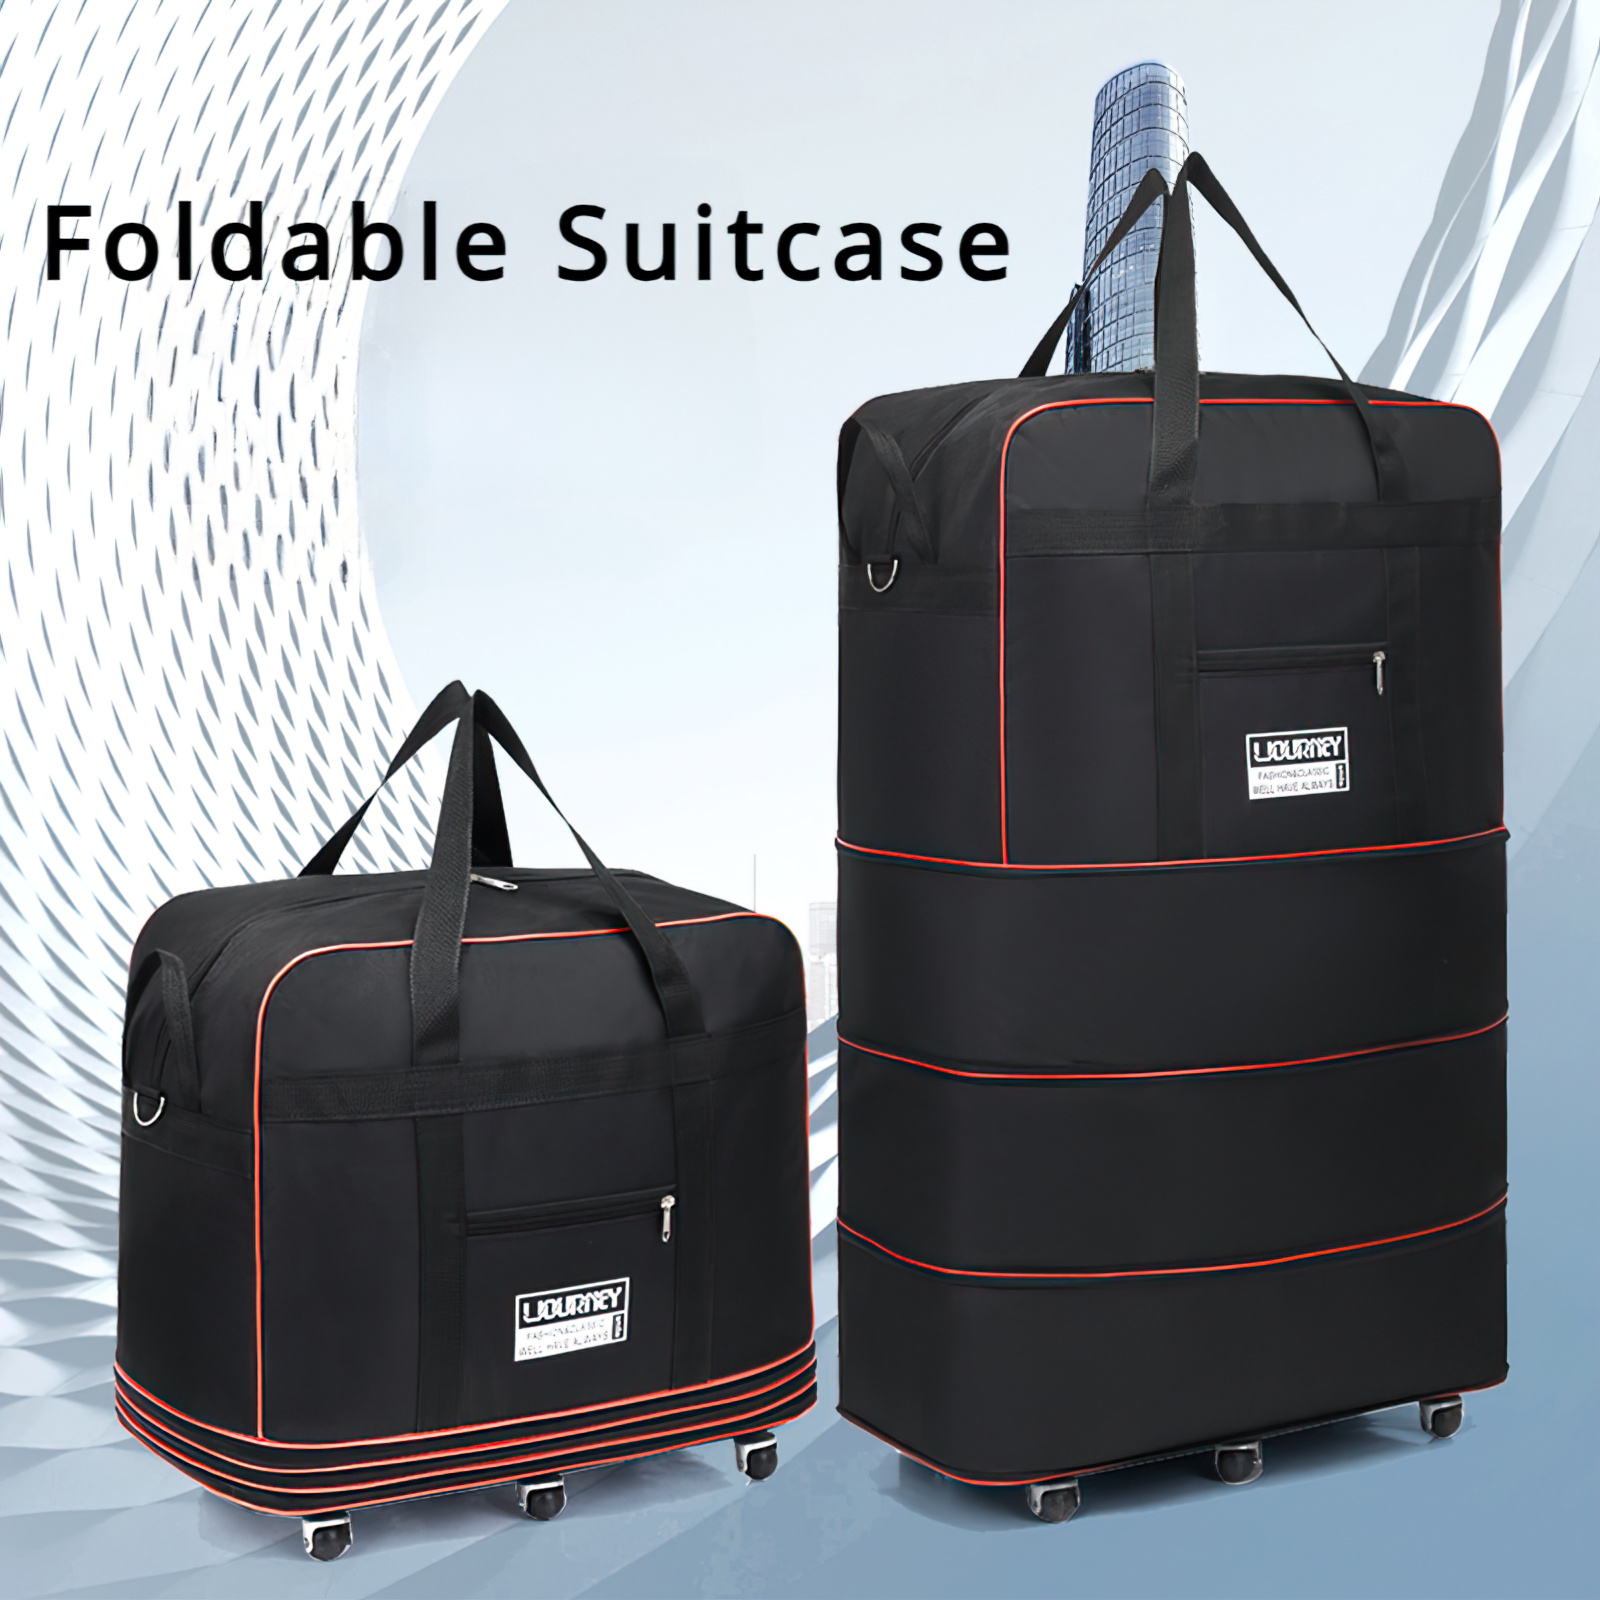 

Foldable Travel Luggage Bag With Wheels, Rolling Packing Bag, Simplistic Plastic Durable Storage For Business Trip, Travel Essentials